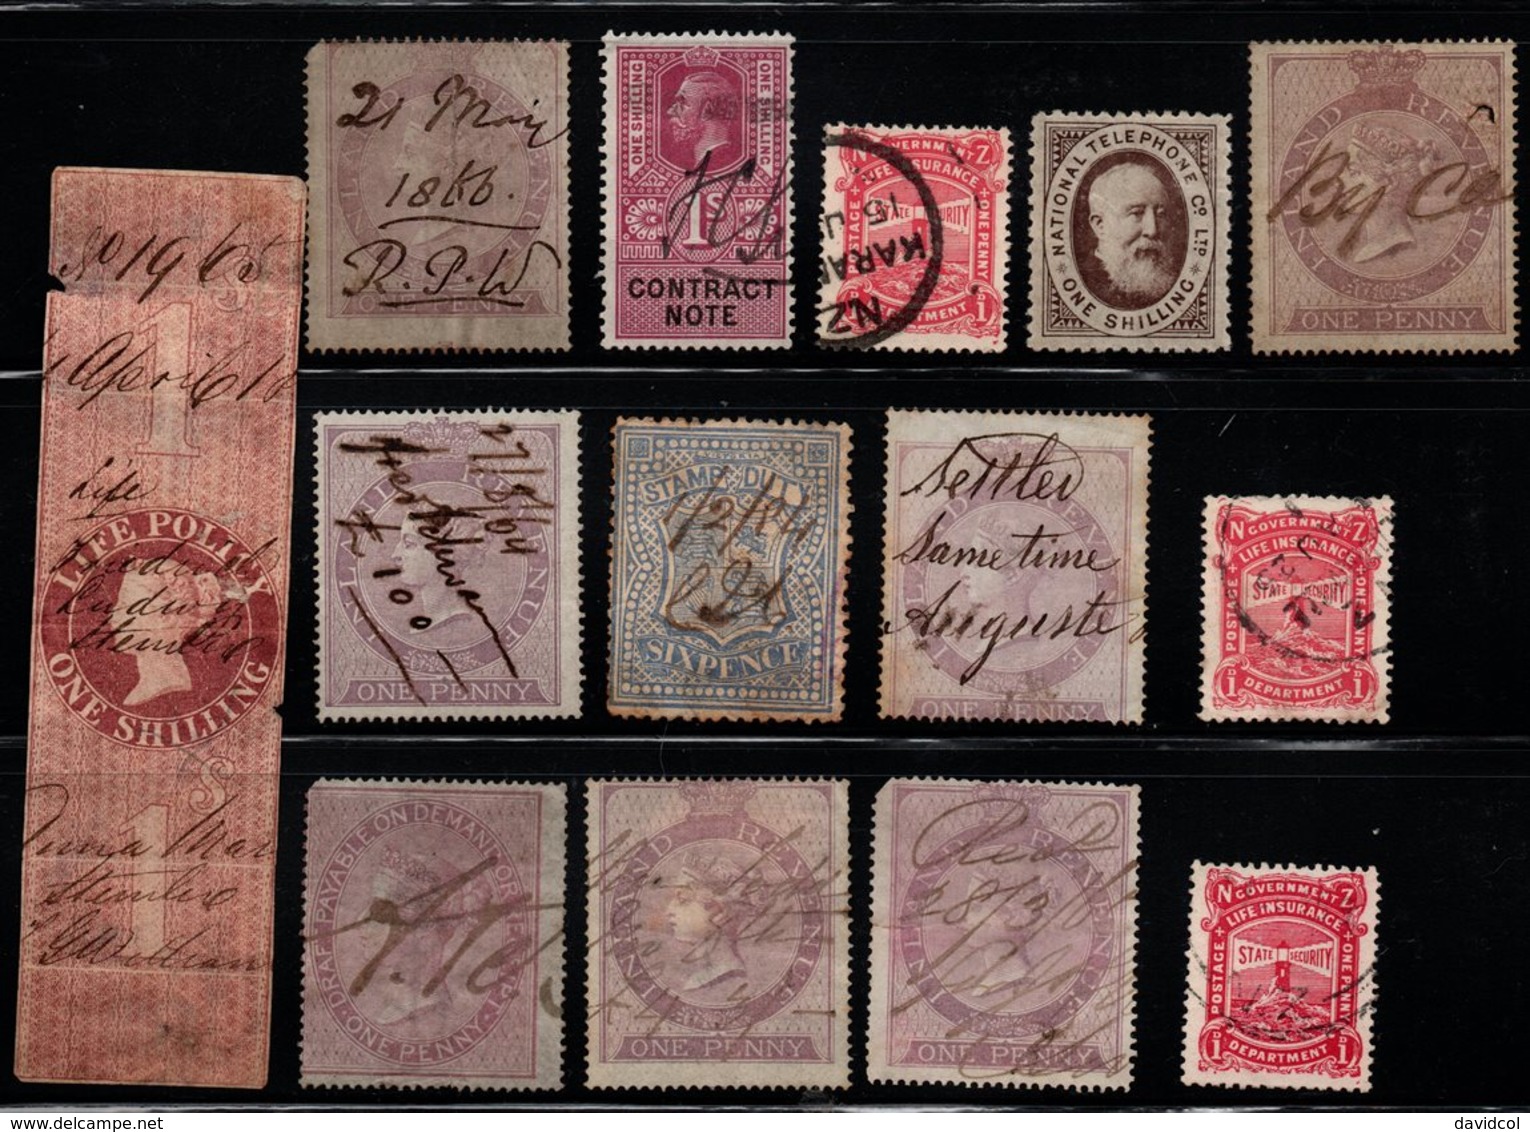 R809 - GREAT BRITAIN. " REVENUES-TELEPHONE-STAM DUTY-INSURANCE " - USED - LOT X 14 STAMPS - SHADES - - Revenue Stamps